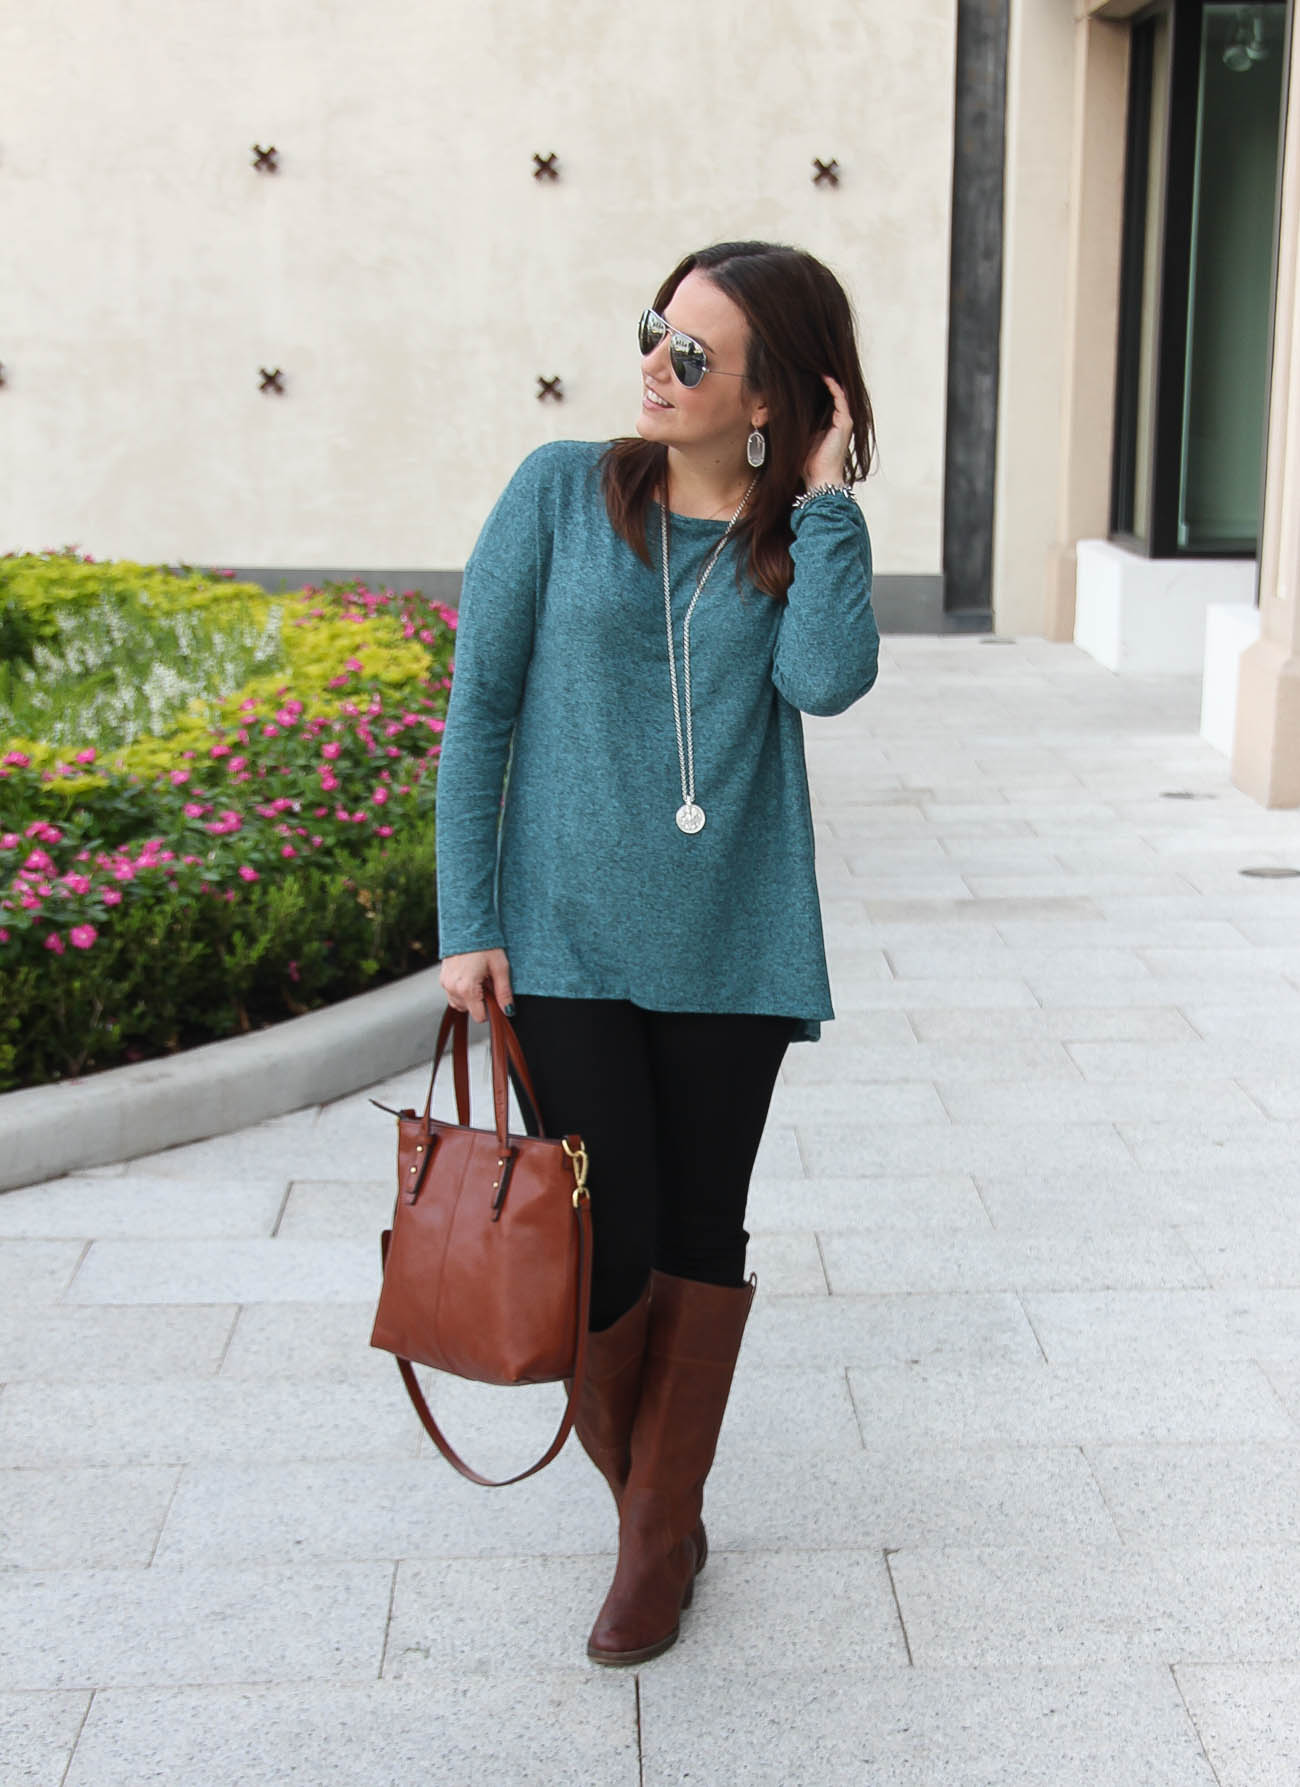 Teal Sweater + Brown Riding Boots - Lady in VioletLady in Violet